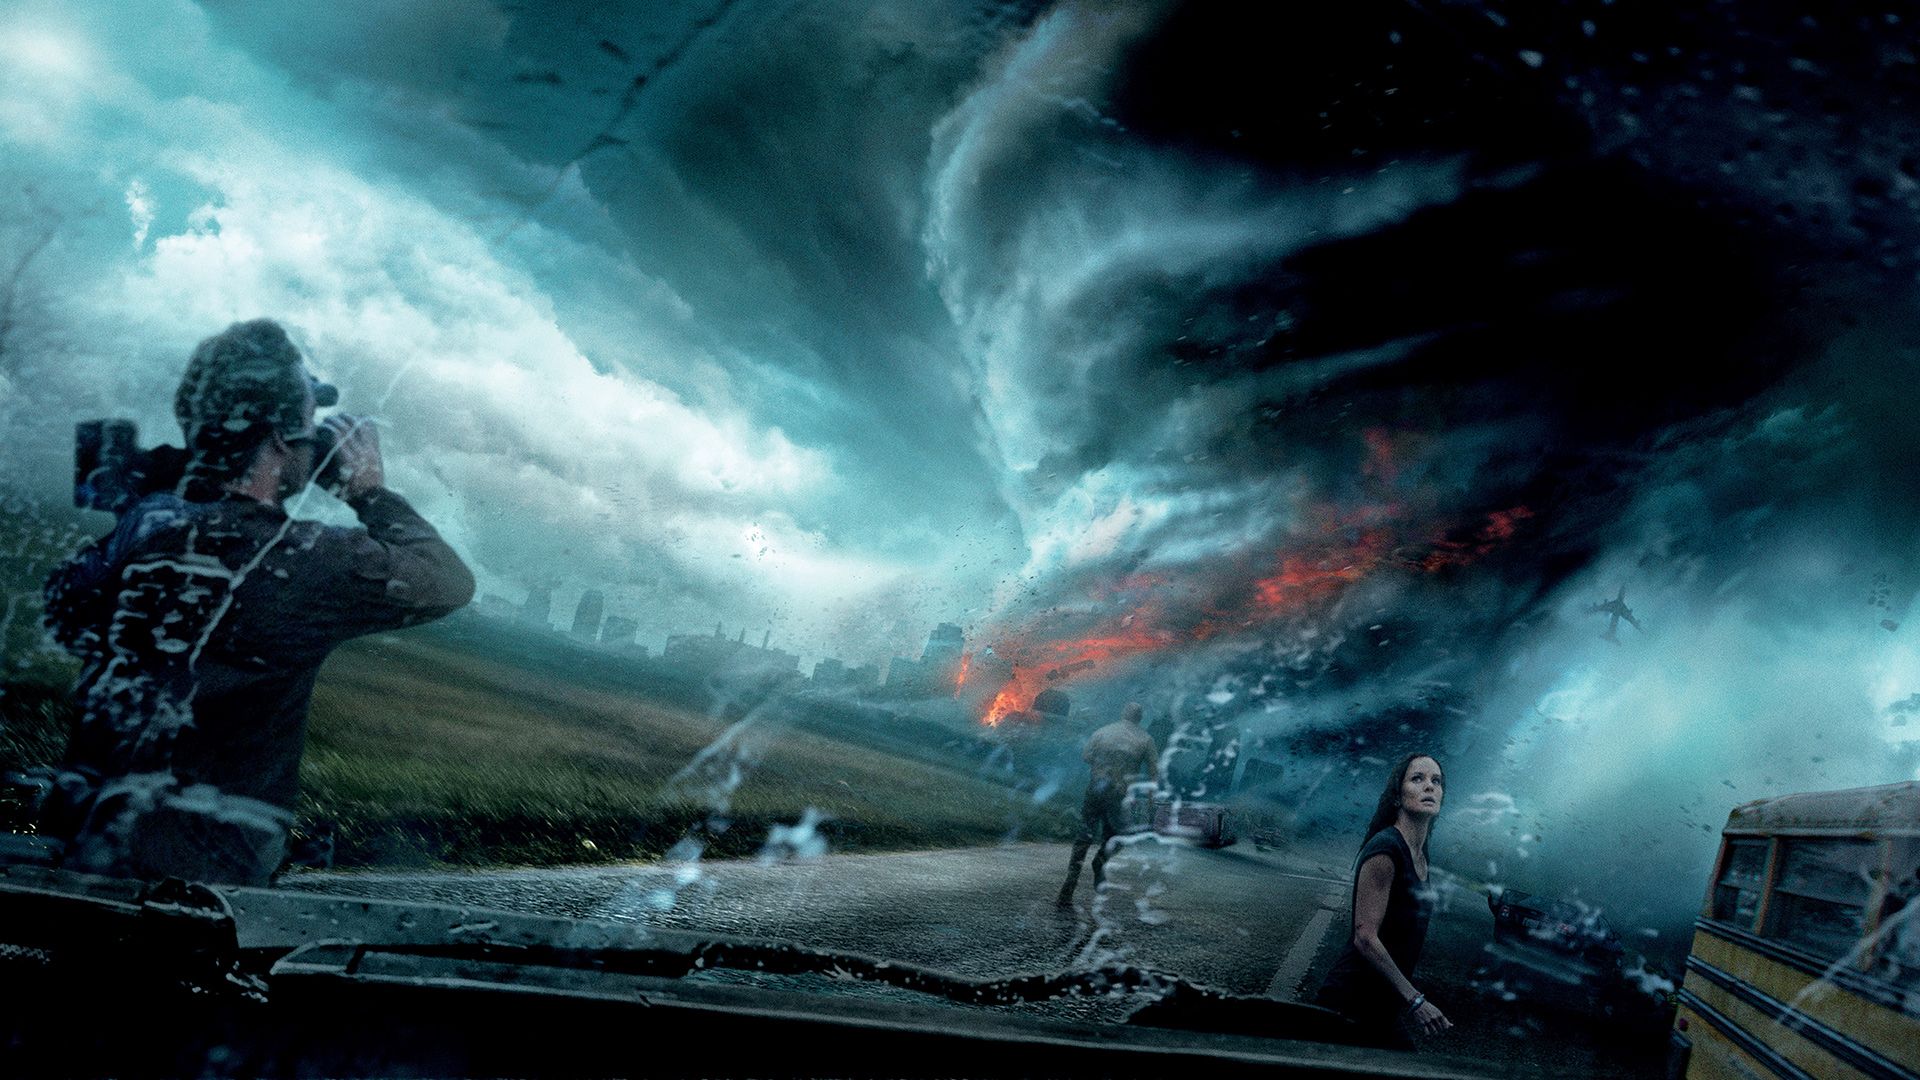 Into the Storm background